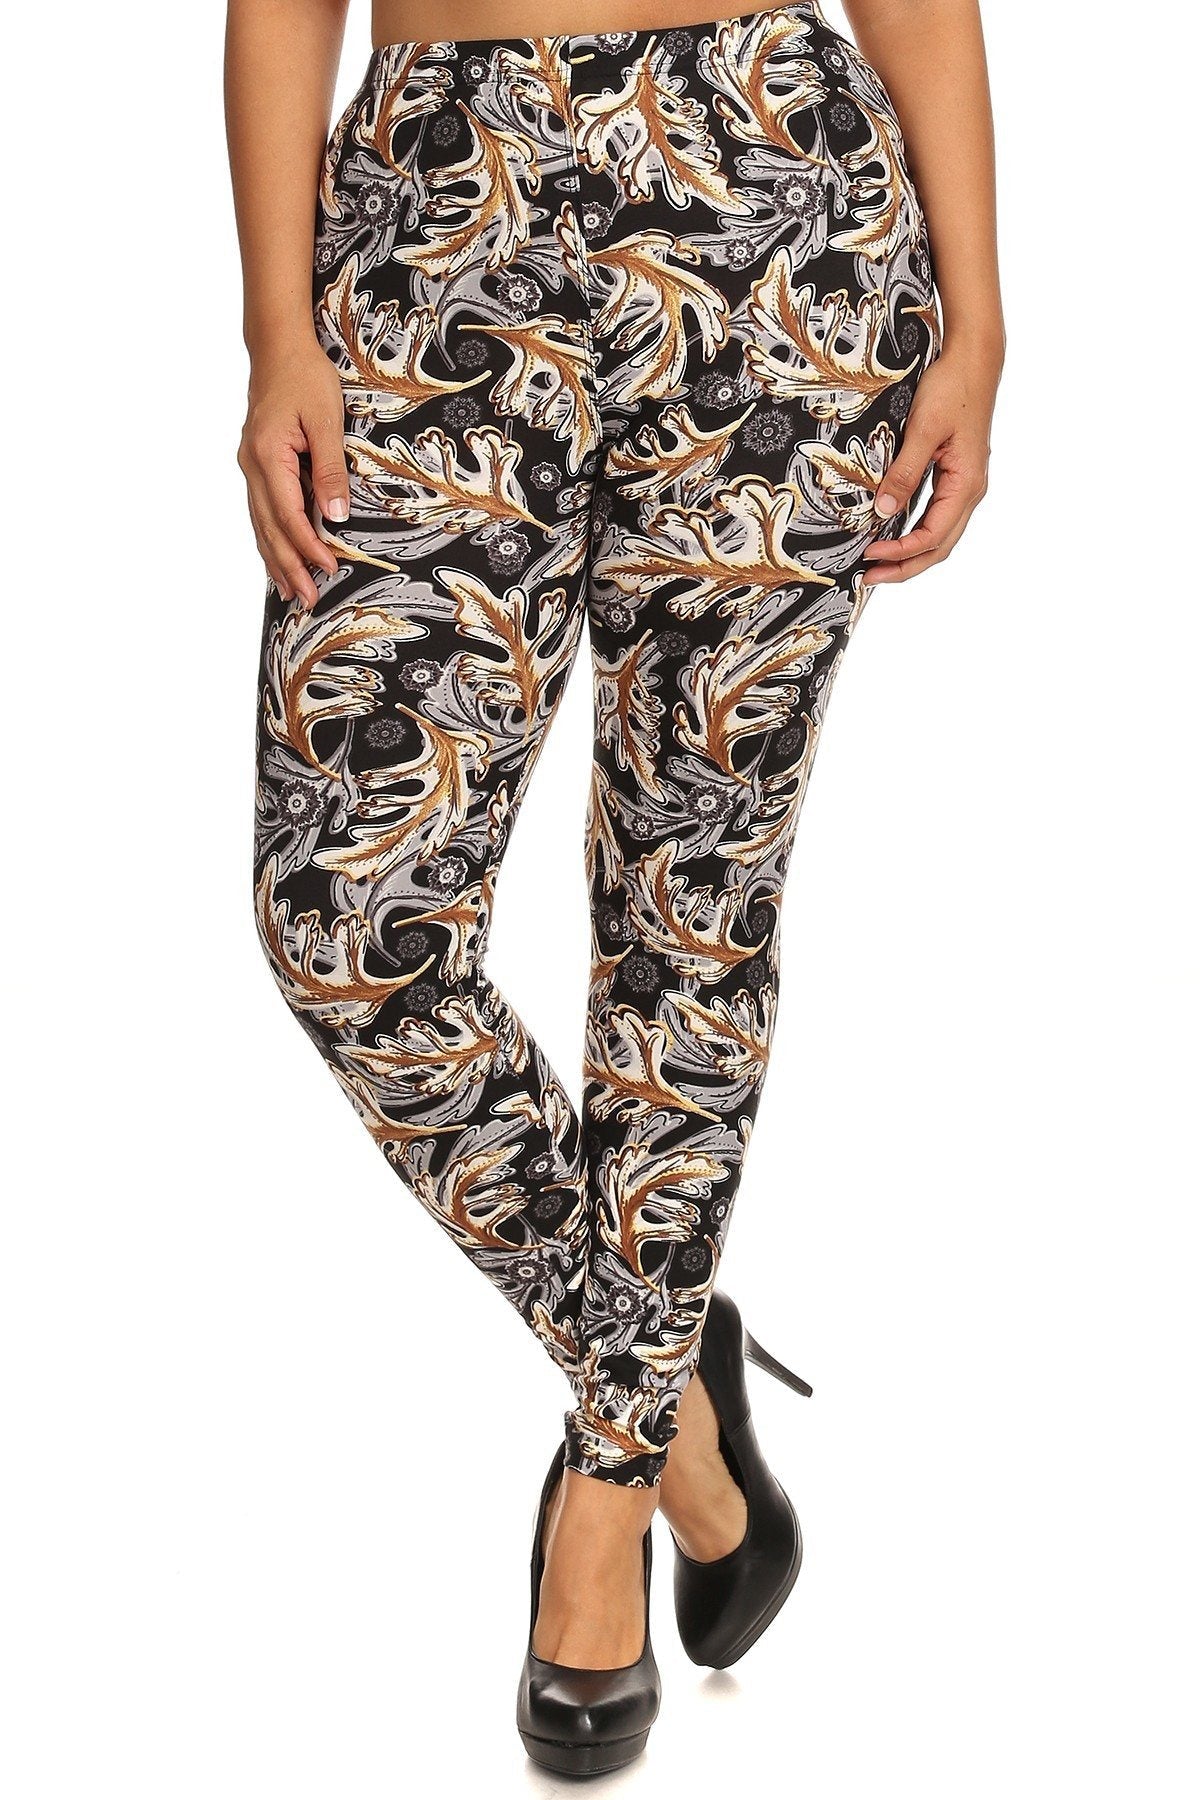 Abstract Leaf Print, Full Length Leggings In A Slim Fitting Style With A Banded High Waist - Fashion Quality Boutik